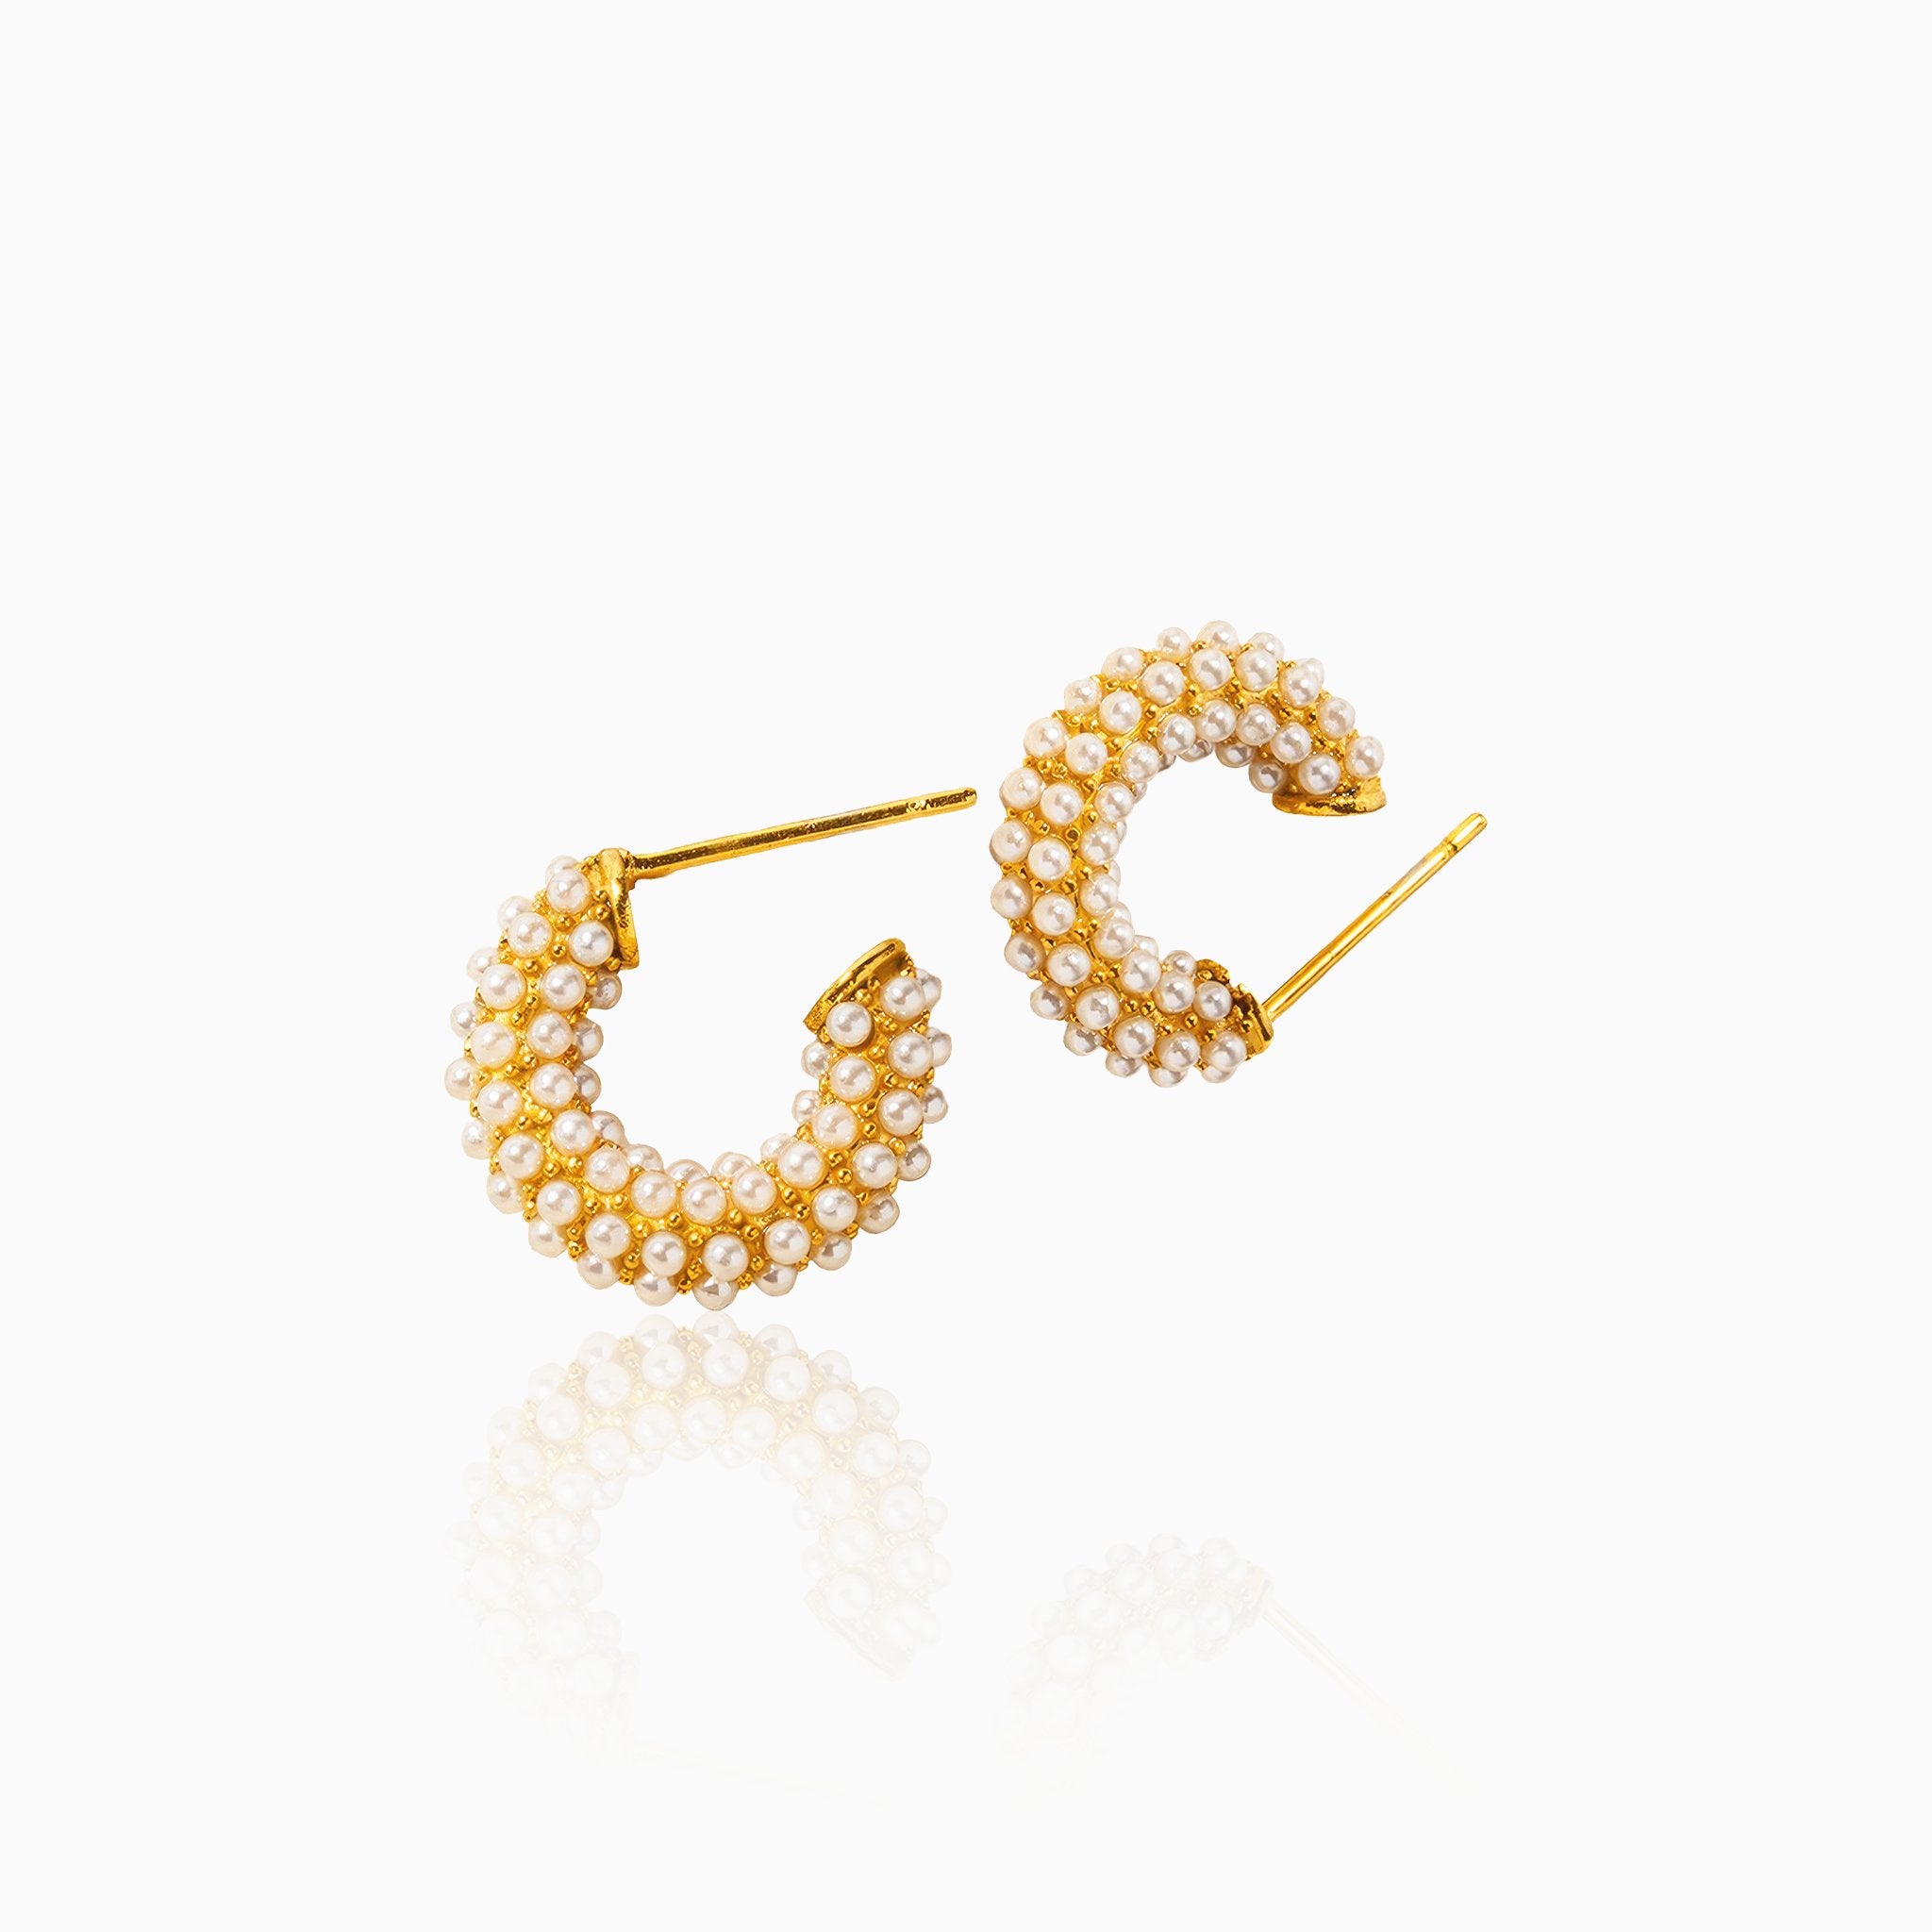 C-Shaped Earrings Encrusted with Pearls - Nobbier - Earrings - 18K Gold And Titanium PVD Coated Jewelry